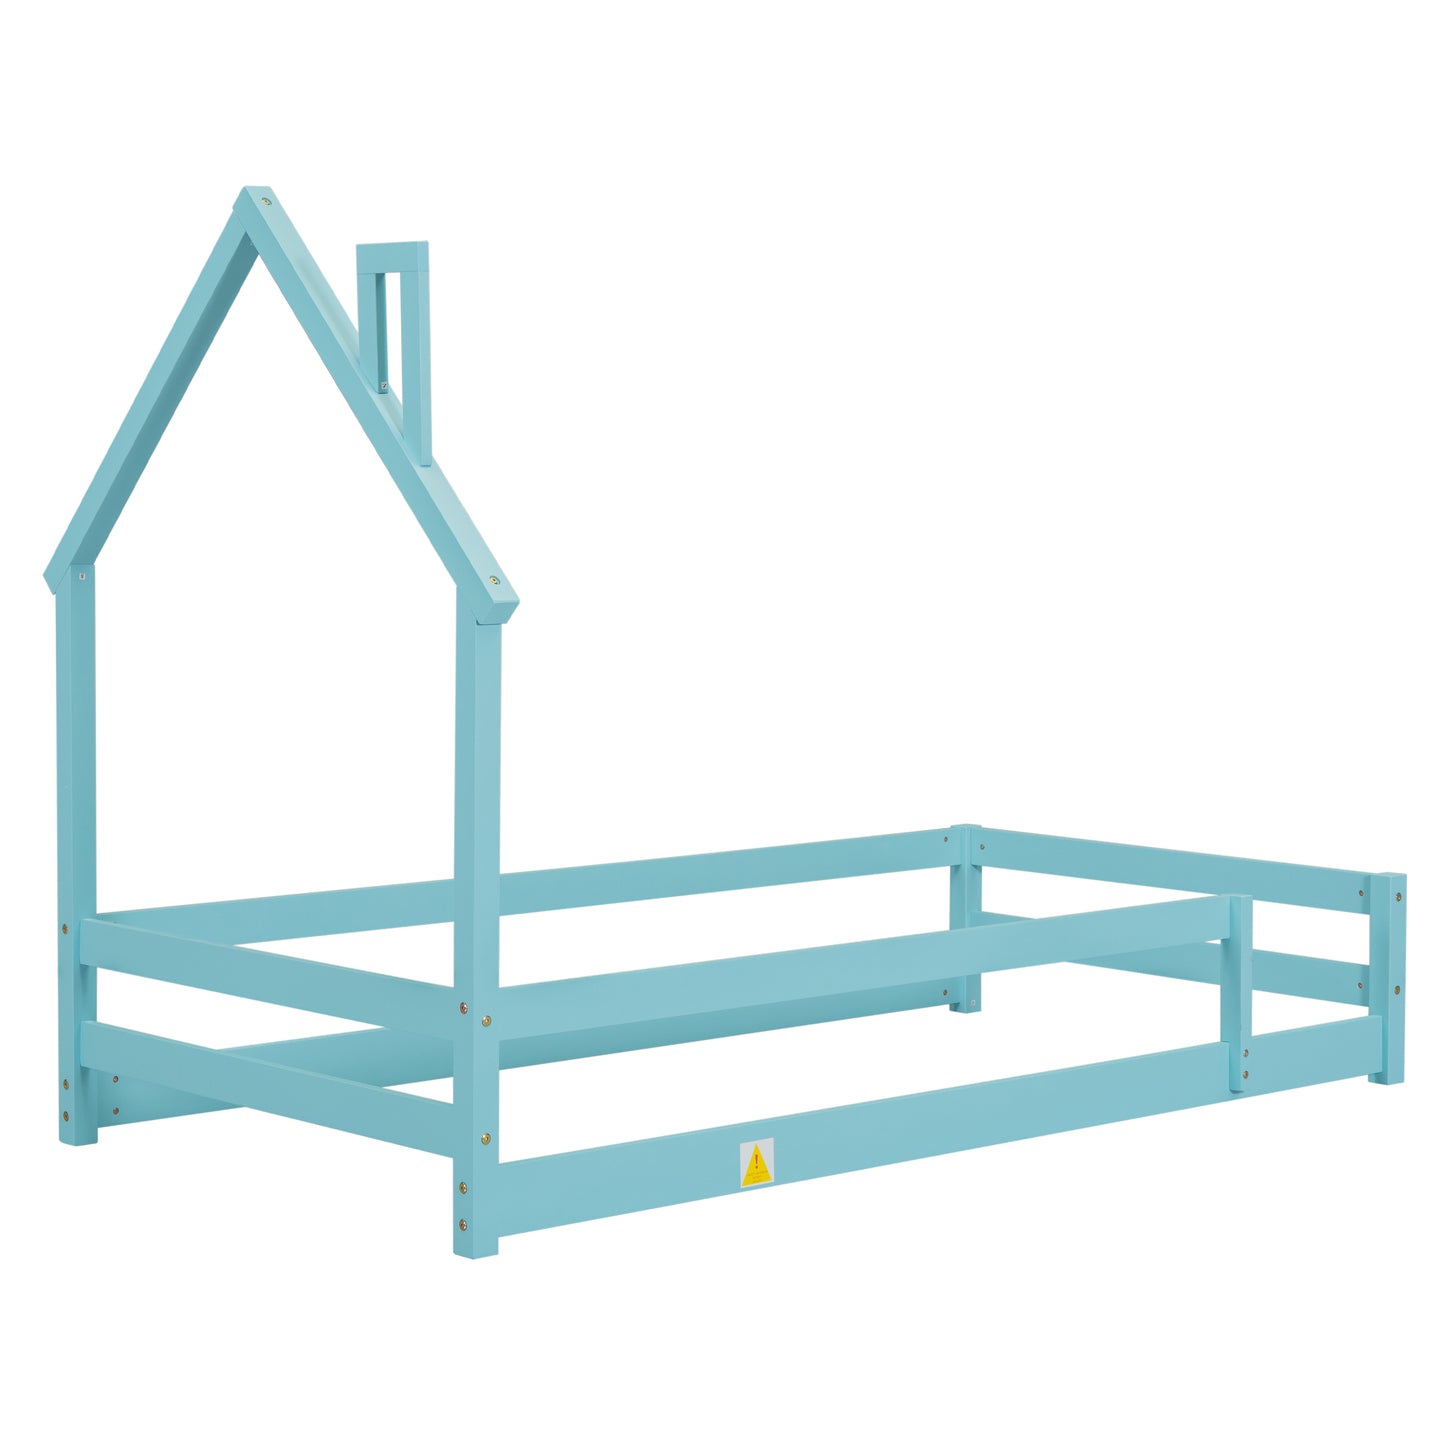 Twin Size Wood Platform bed with House-shaped Headboard Floor bed with Fences,Light Blue